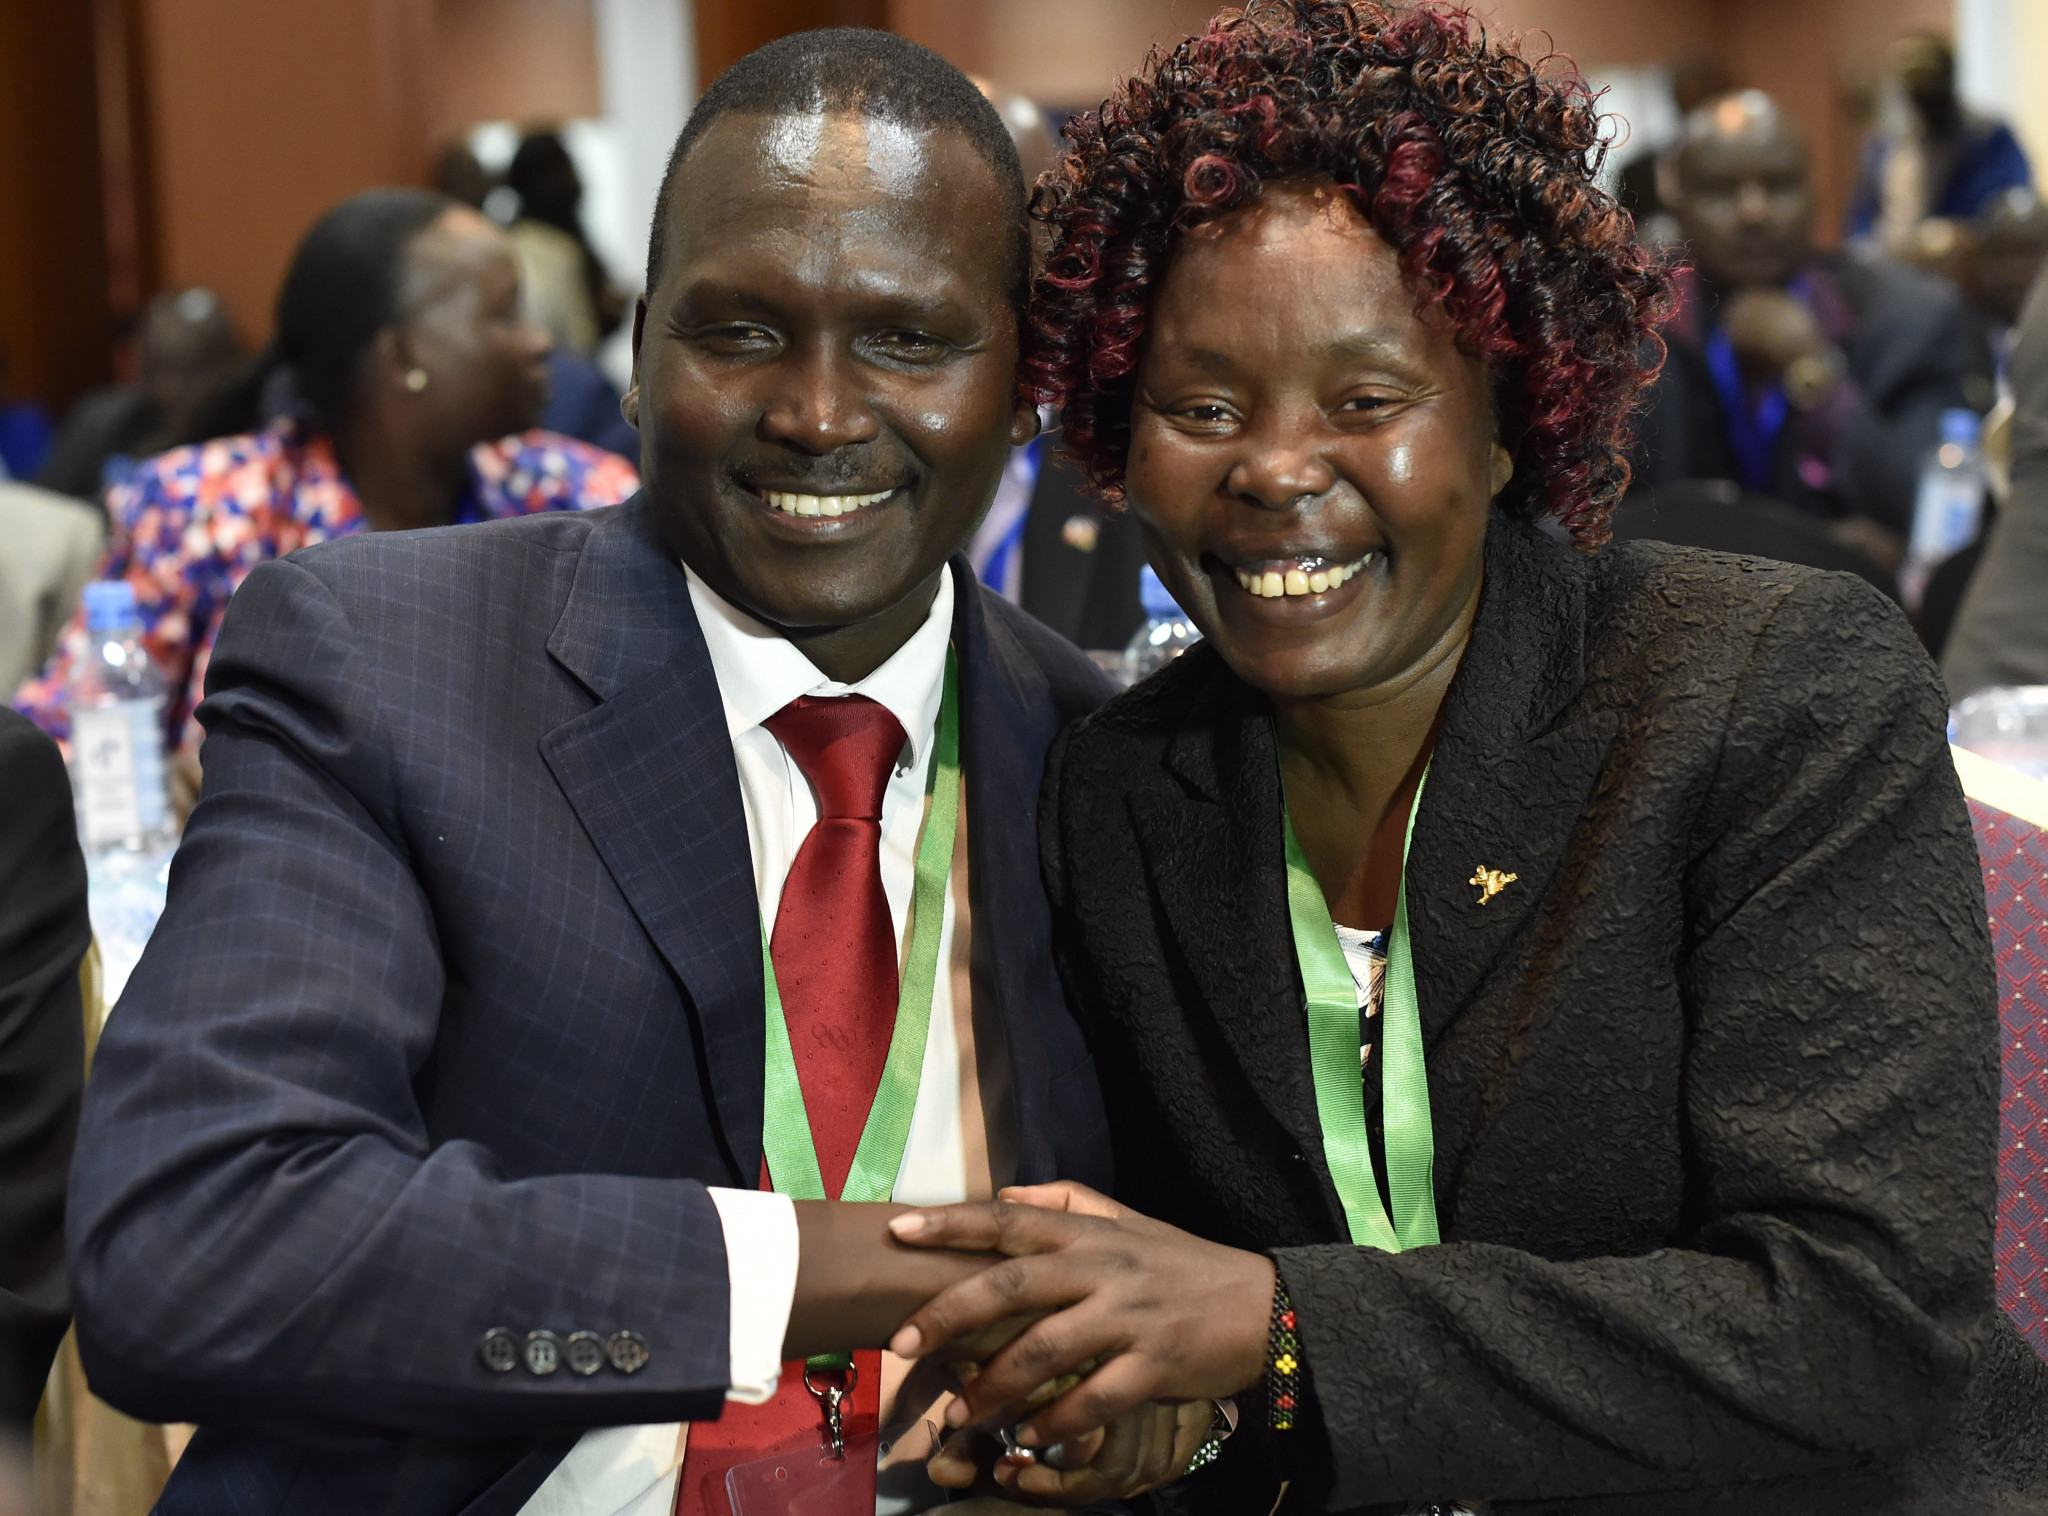 Paul Tergat celebrates his election as chairman of the National Olympic Committee of Kenya with Tegla Loroupe, whose own bid to be elected the woman representative was unsuccessful ©Getty Images